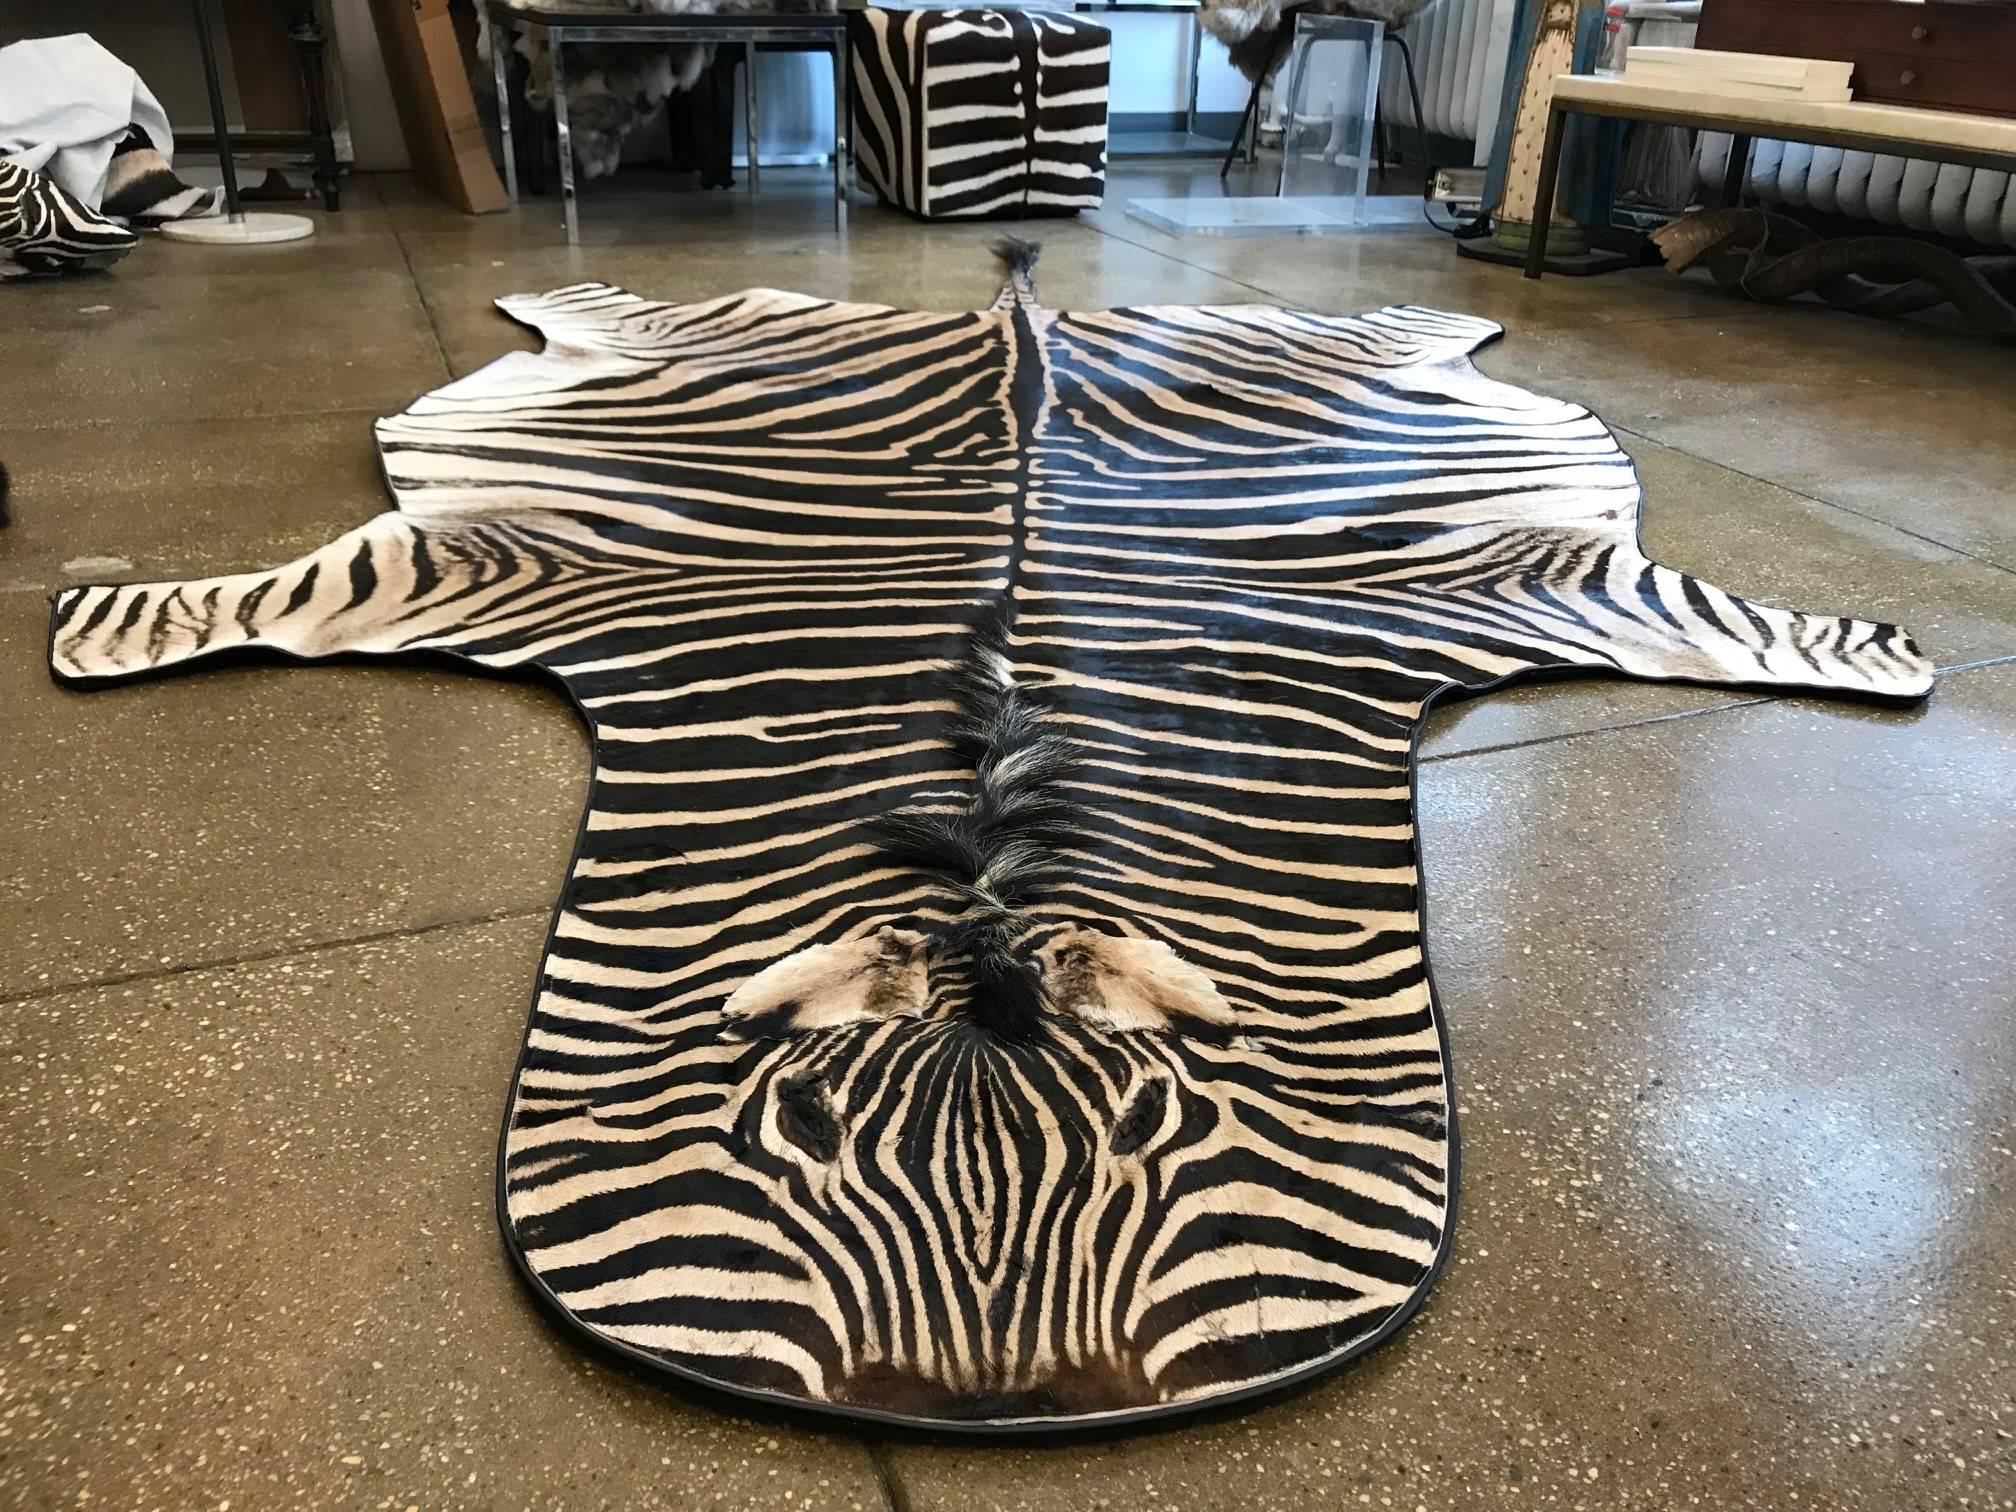 Beautiful grade “A” zebra skin rug lined with canvas and finished with leather trim.
Measures: 93'' x 60'' Long excluding the tail
Large selection of hides of different qualities and sizes for rugs and upholstery.